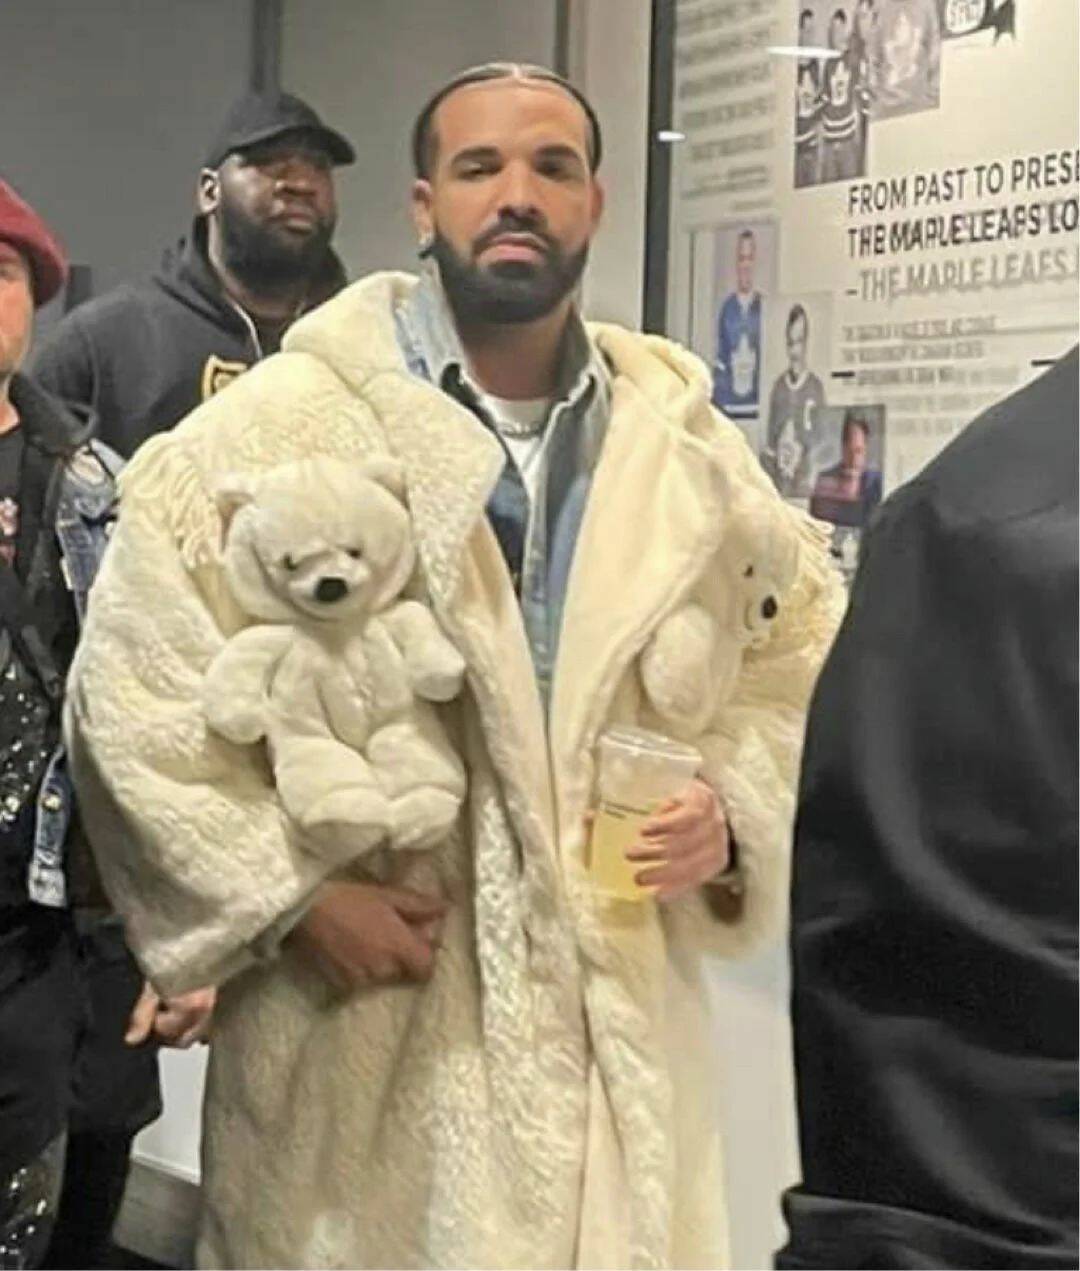 Drake's "Outfit" Here. It Does Look Comfy, Though…